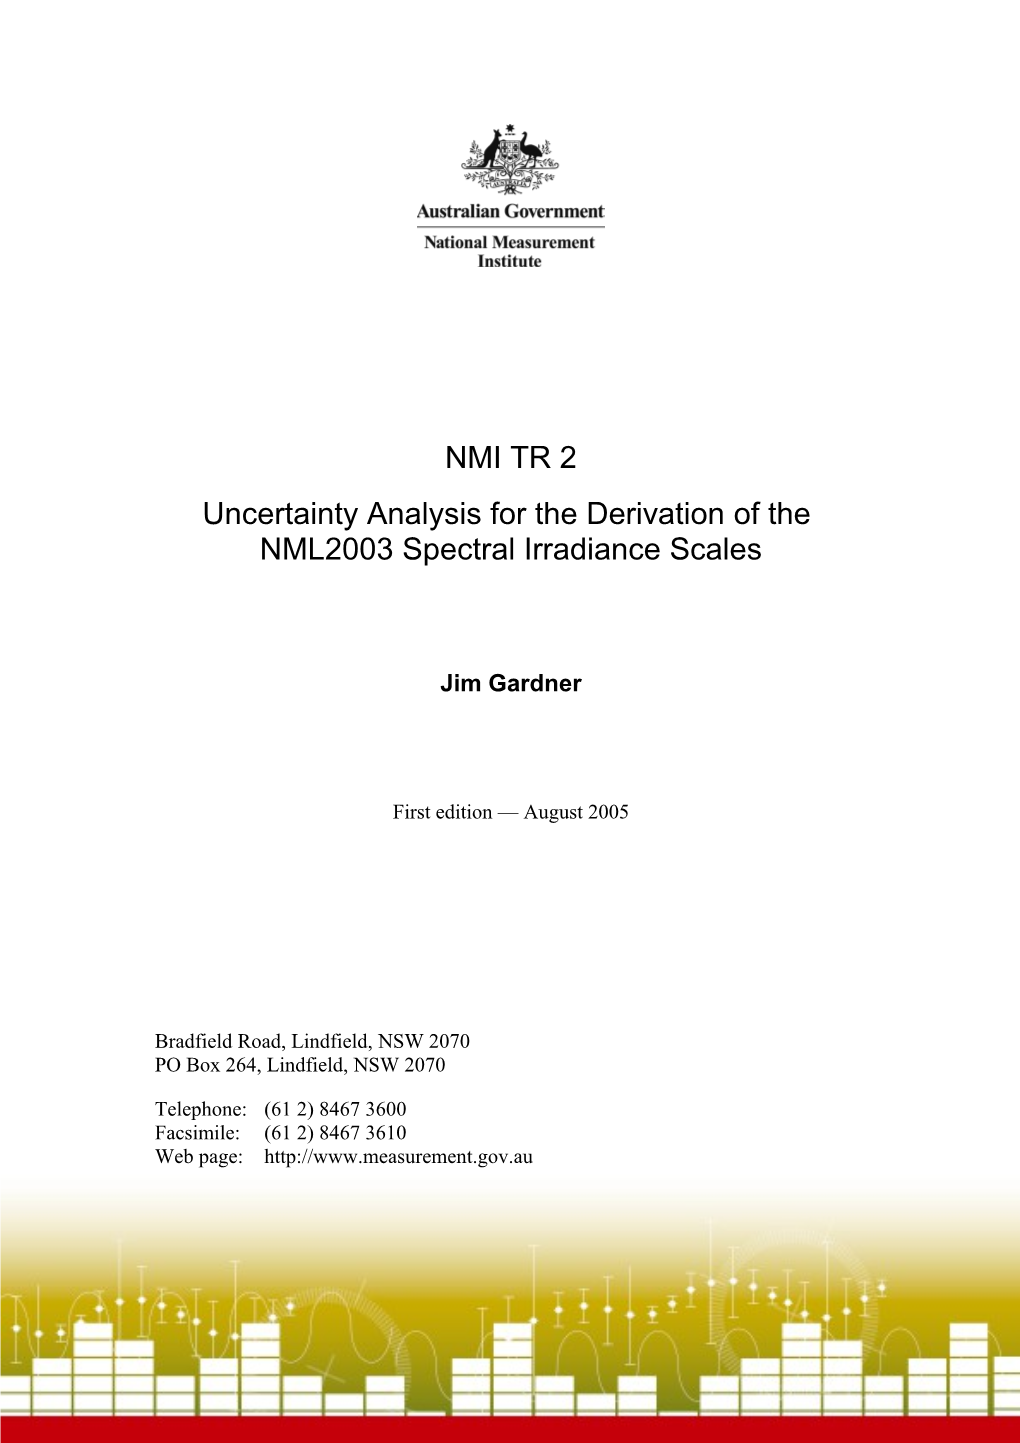 NMI TR 2 Uncertainty Analysis for the Derivation of the NML2003 Spectral Irradiance Scales